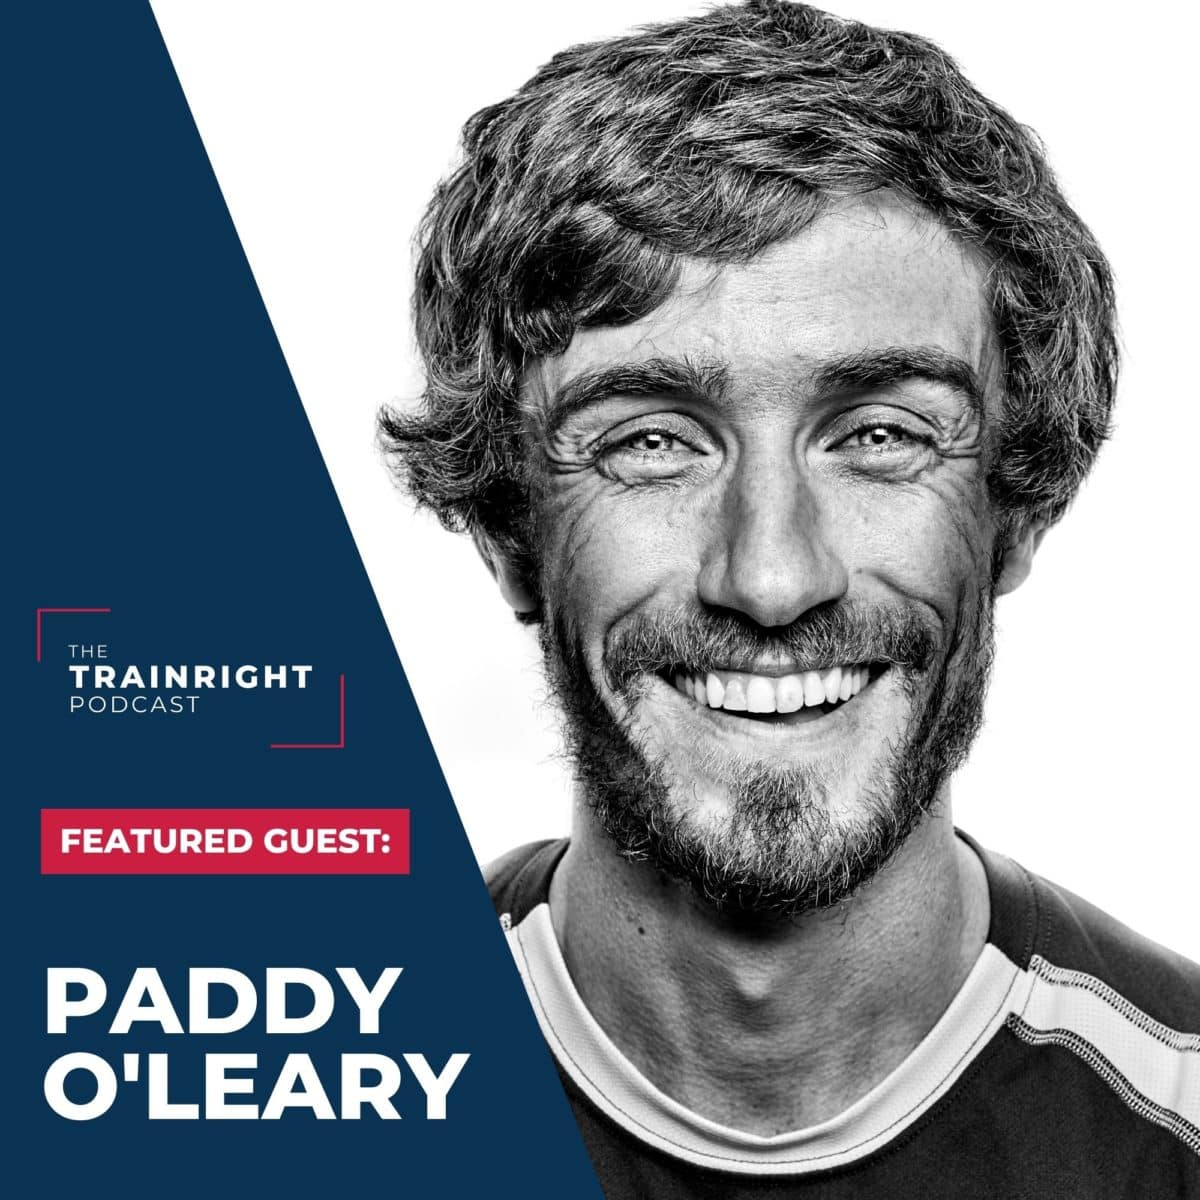 Paddy O'Leary